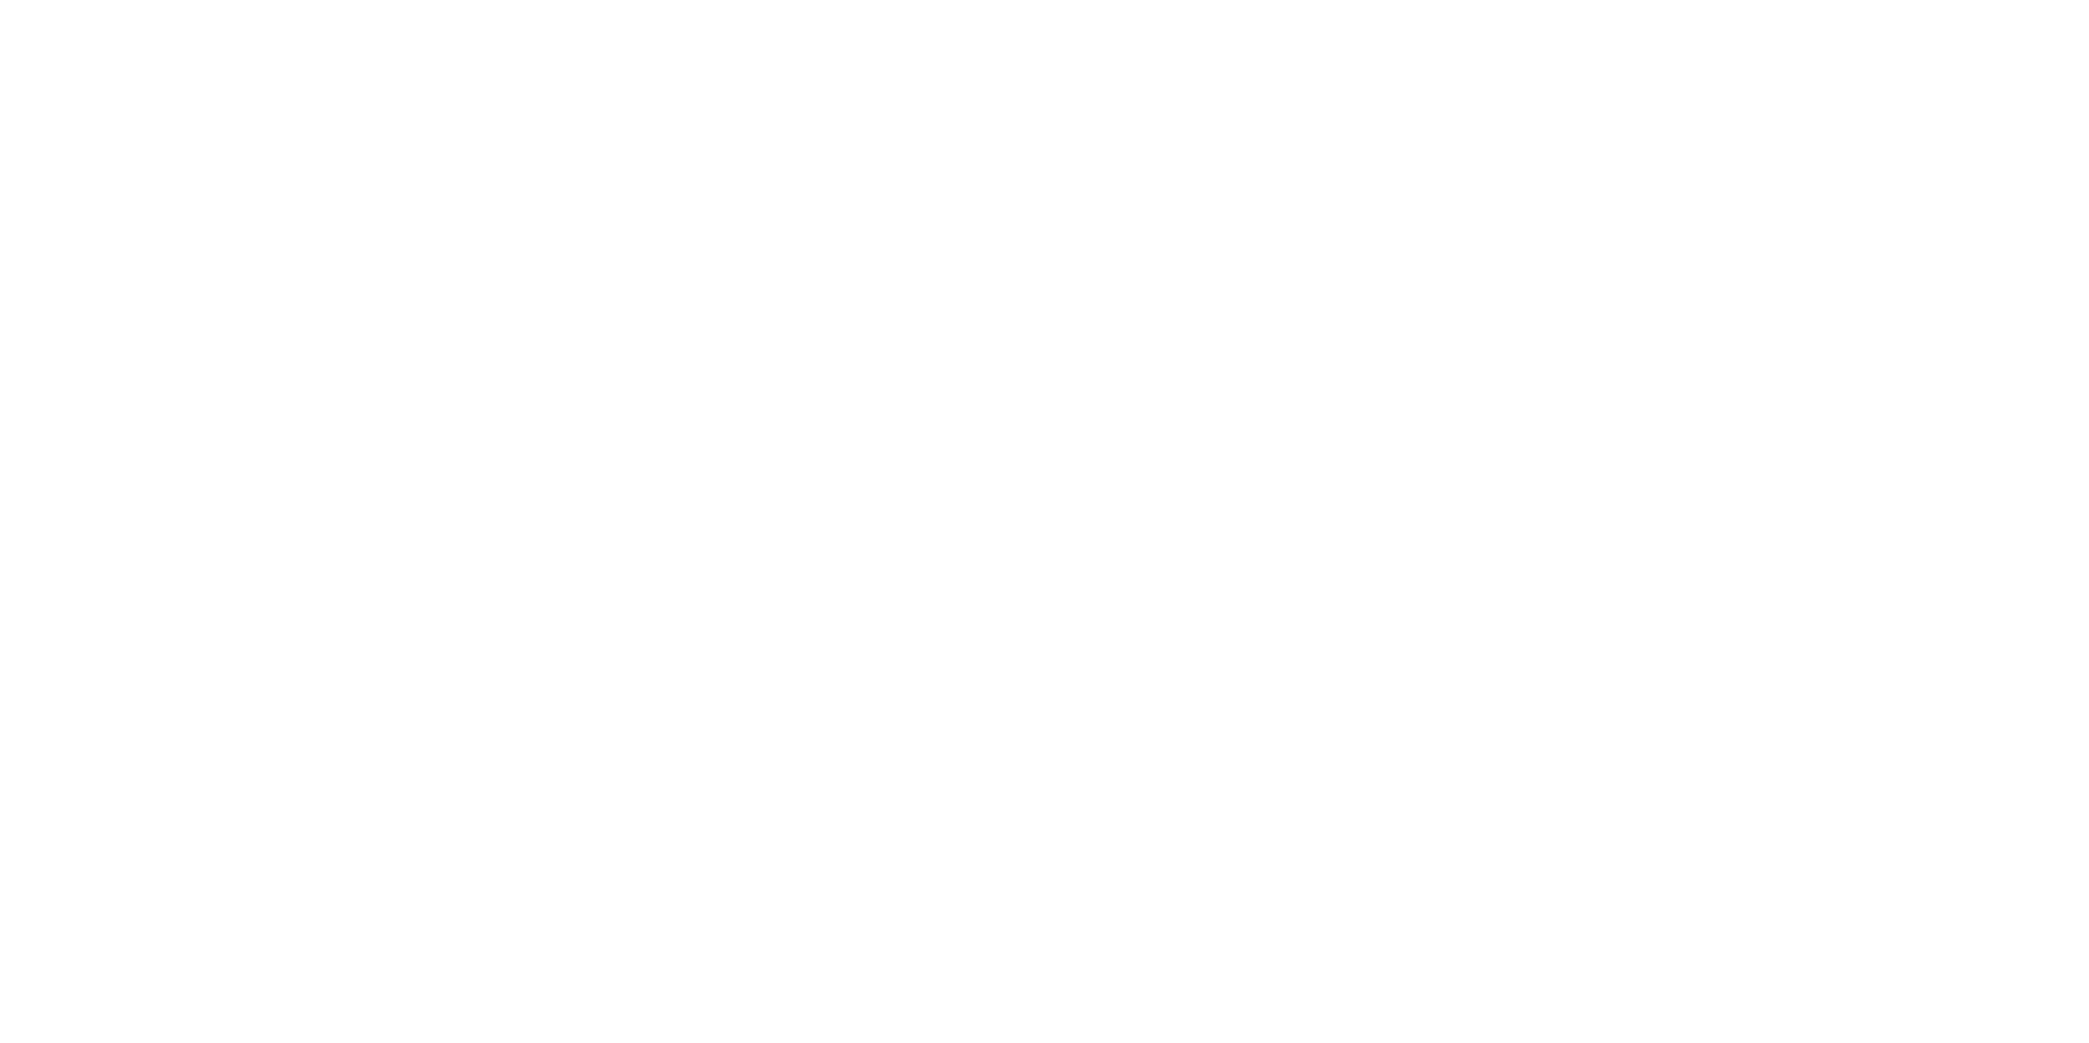 Stryx Collective